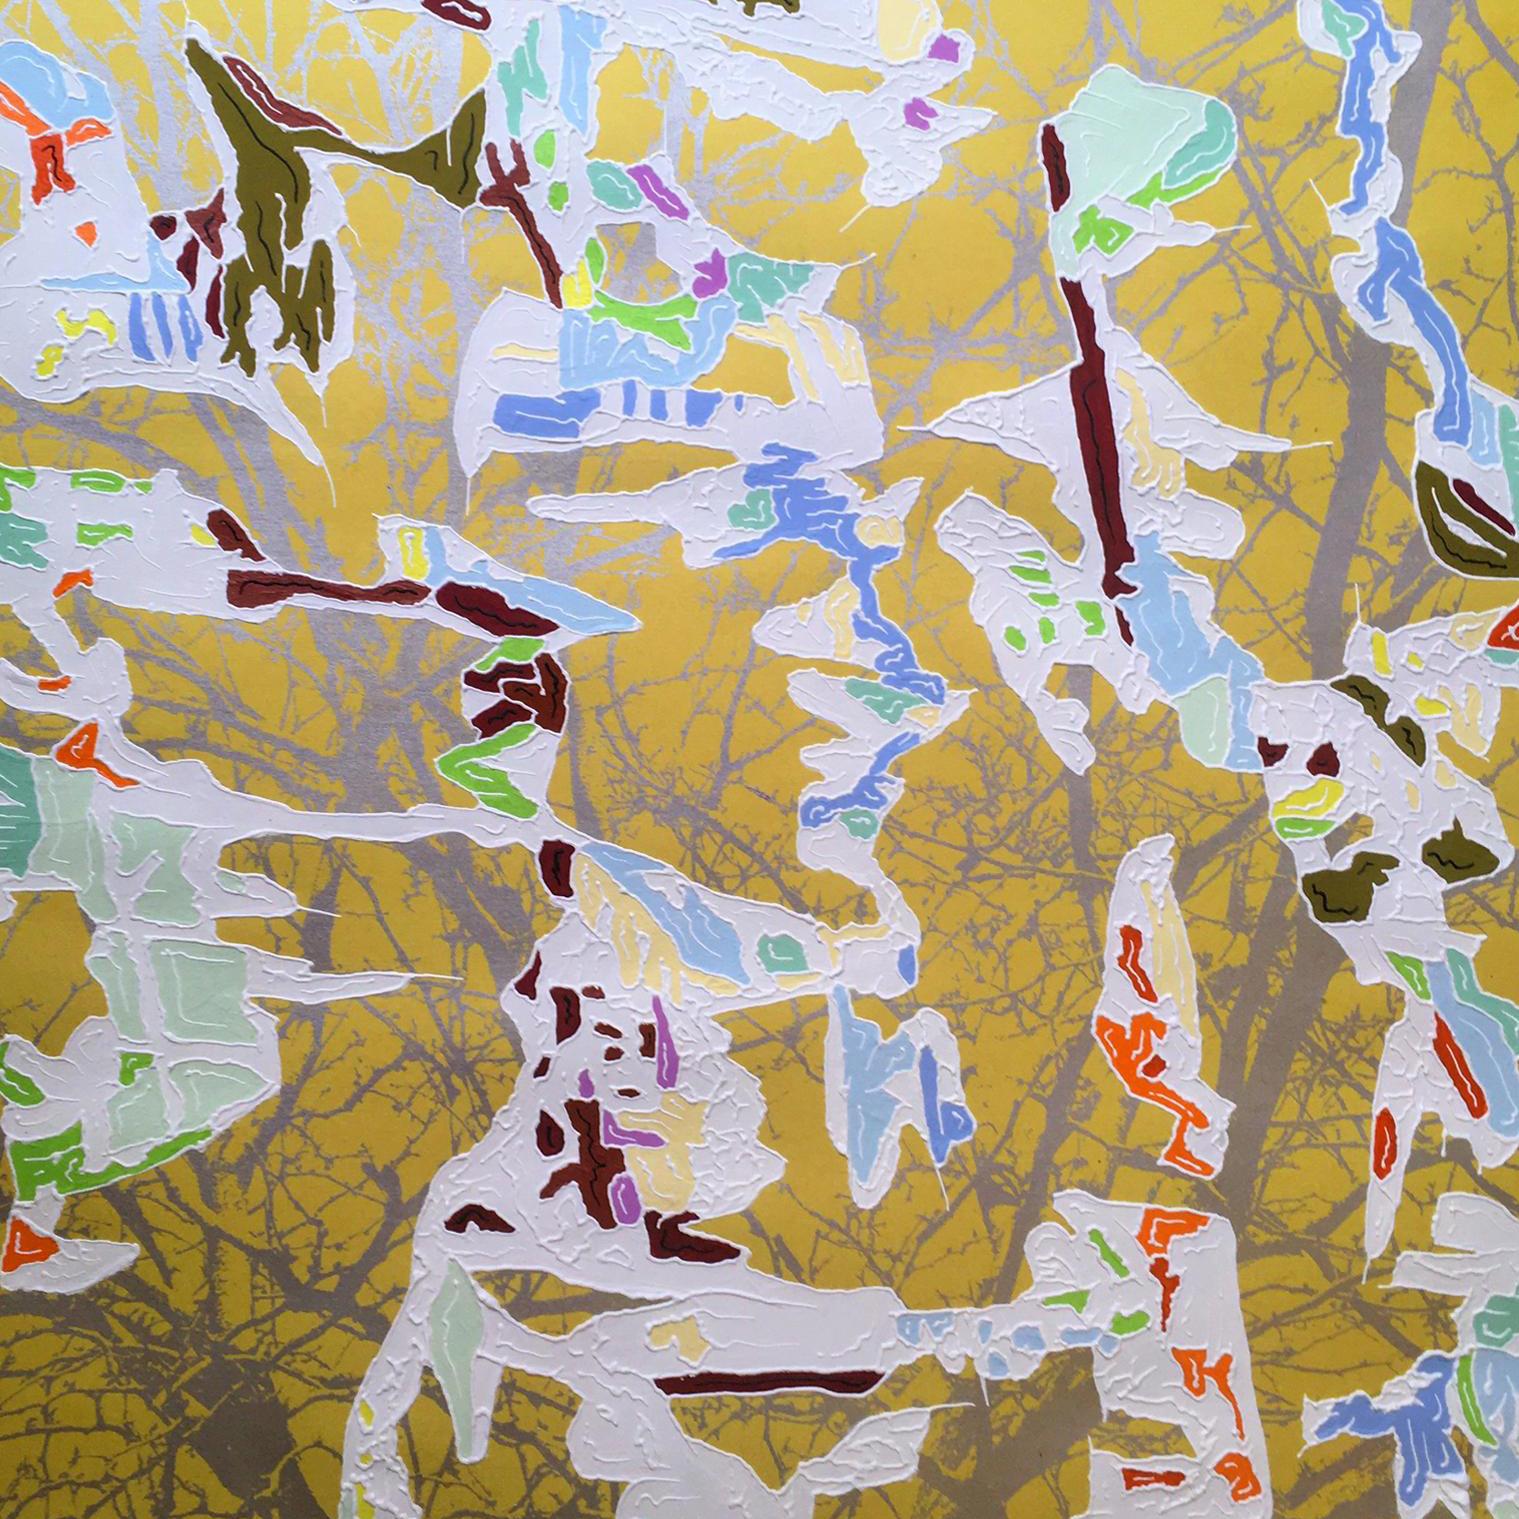 J Ivcevich, Trail Shred (Gold Spring), Abstract mixed media on paper, 2018 2